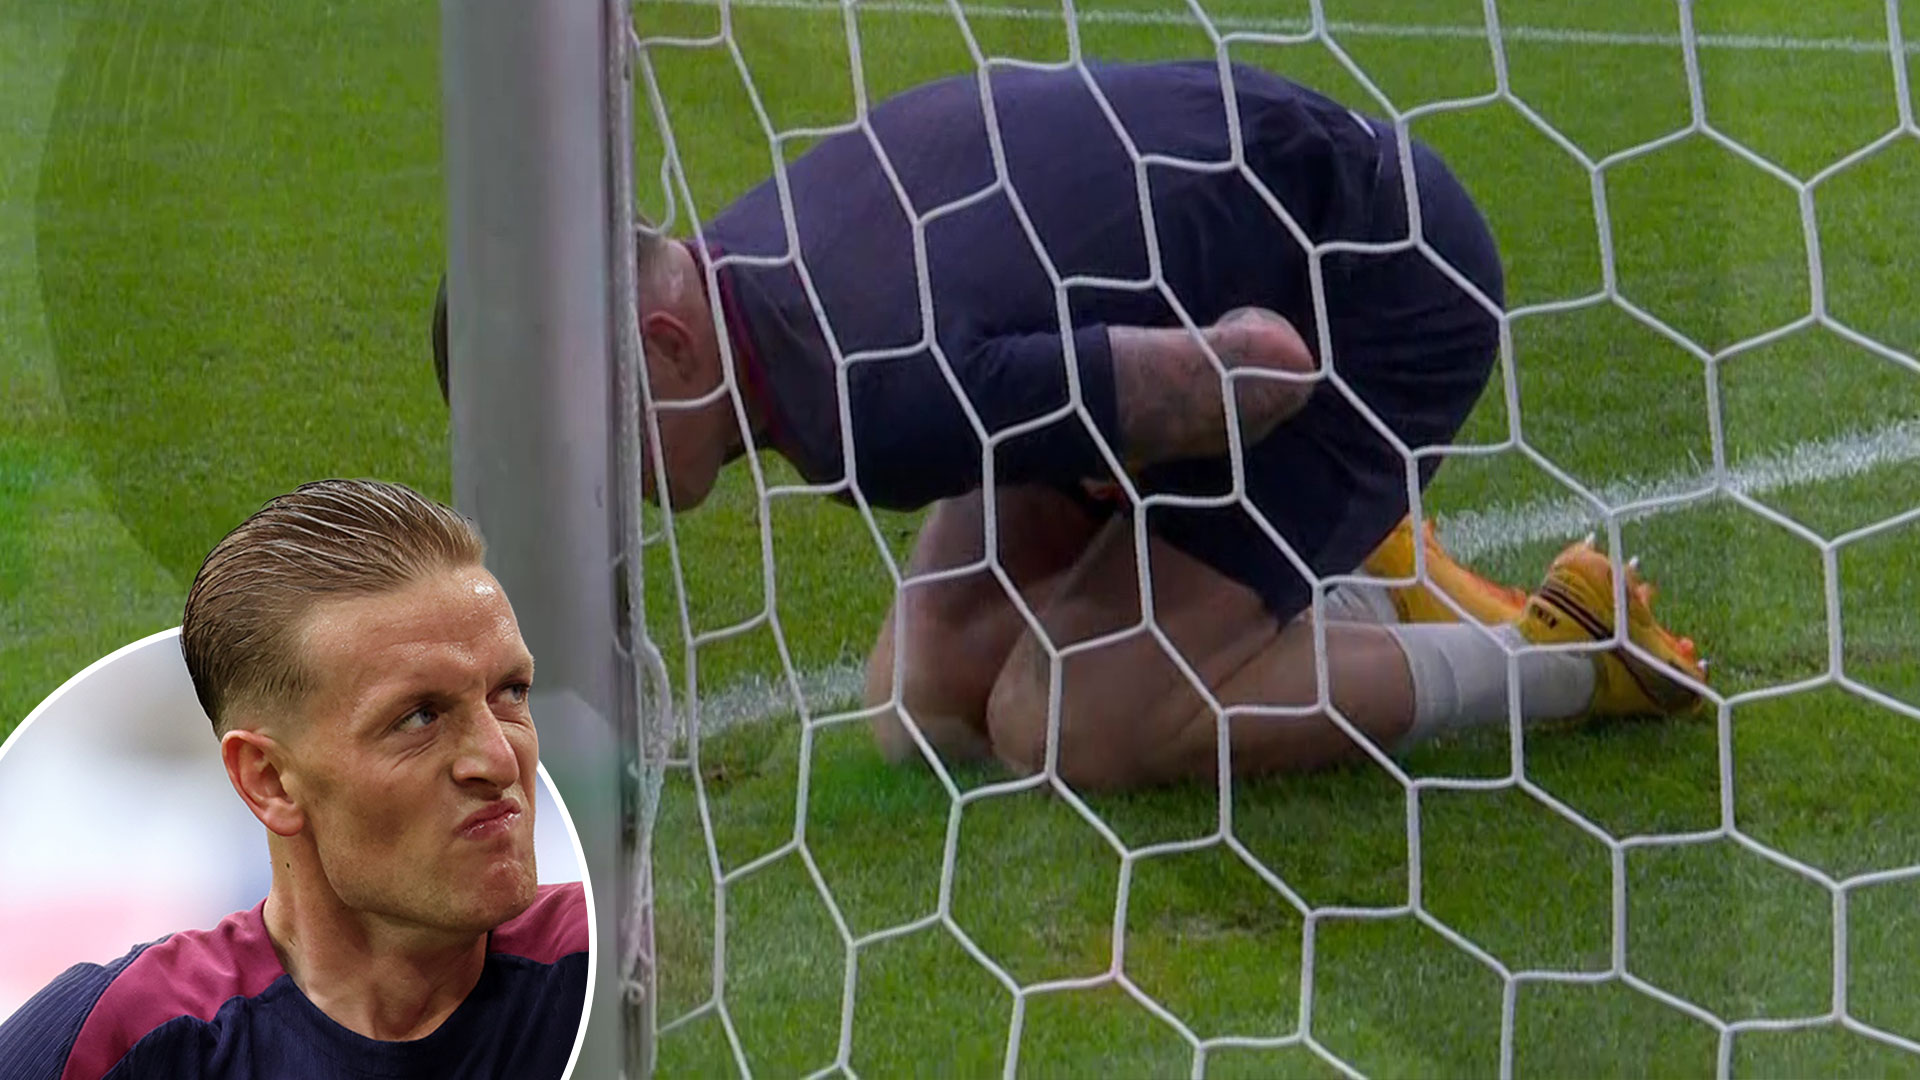 Jordan Pickford suffers injury scare in warm up ahead of England vs Slovakia as he is forced to leave pitch early [Video]